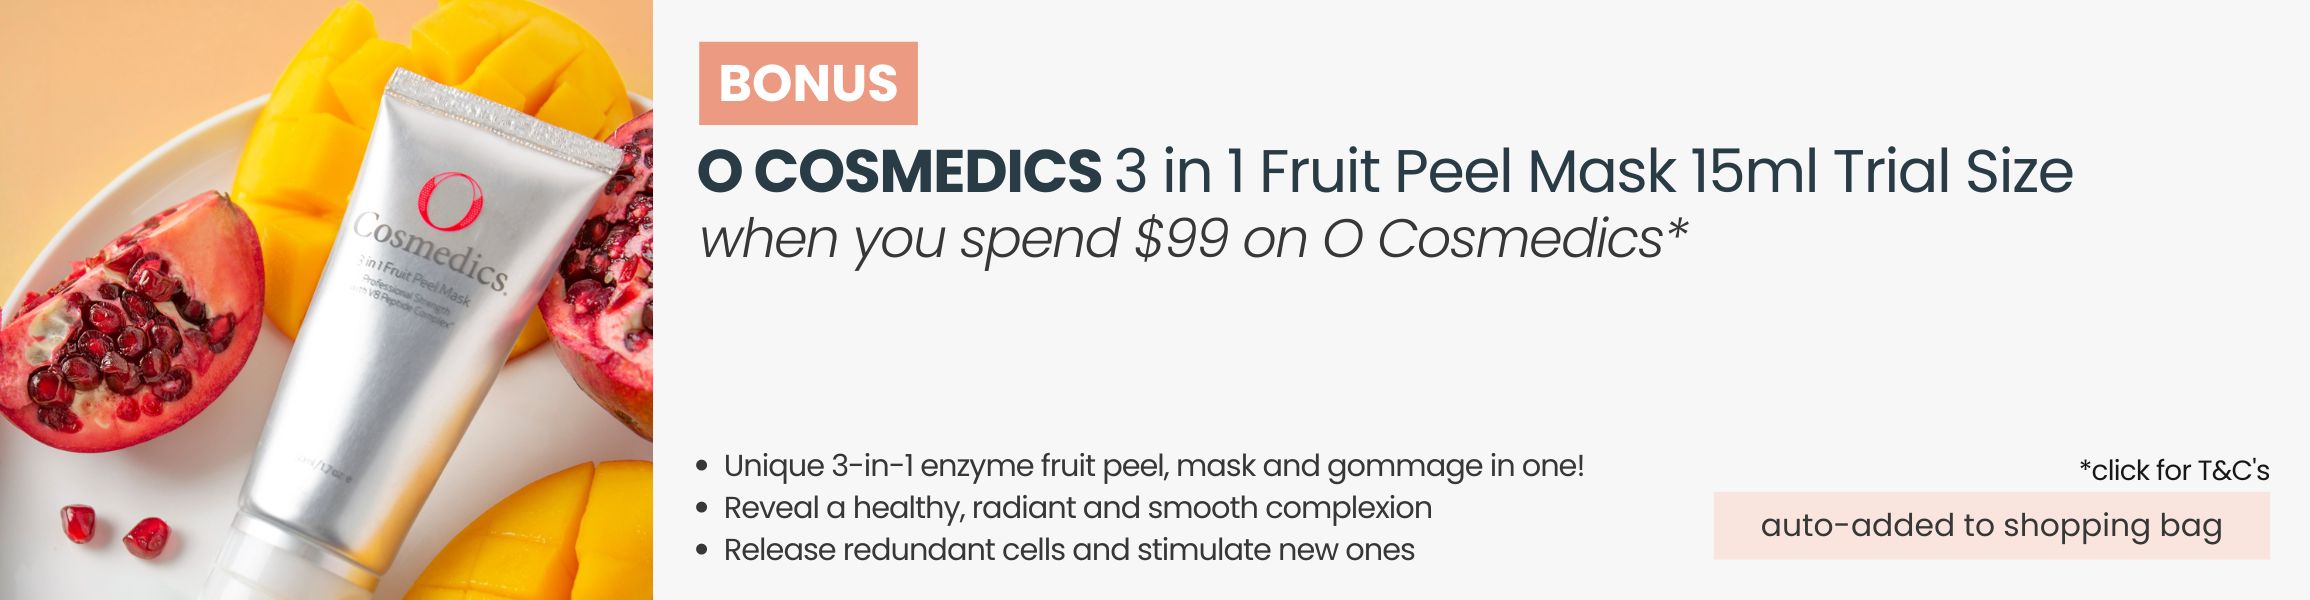 BONUS O Cosmedics 3 in 1 Fruit Peel Mask 15ml Trial Size. Automatically added to your shopping bag when you spend $99 on O Cosmedics products.